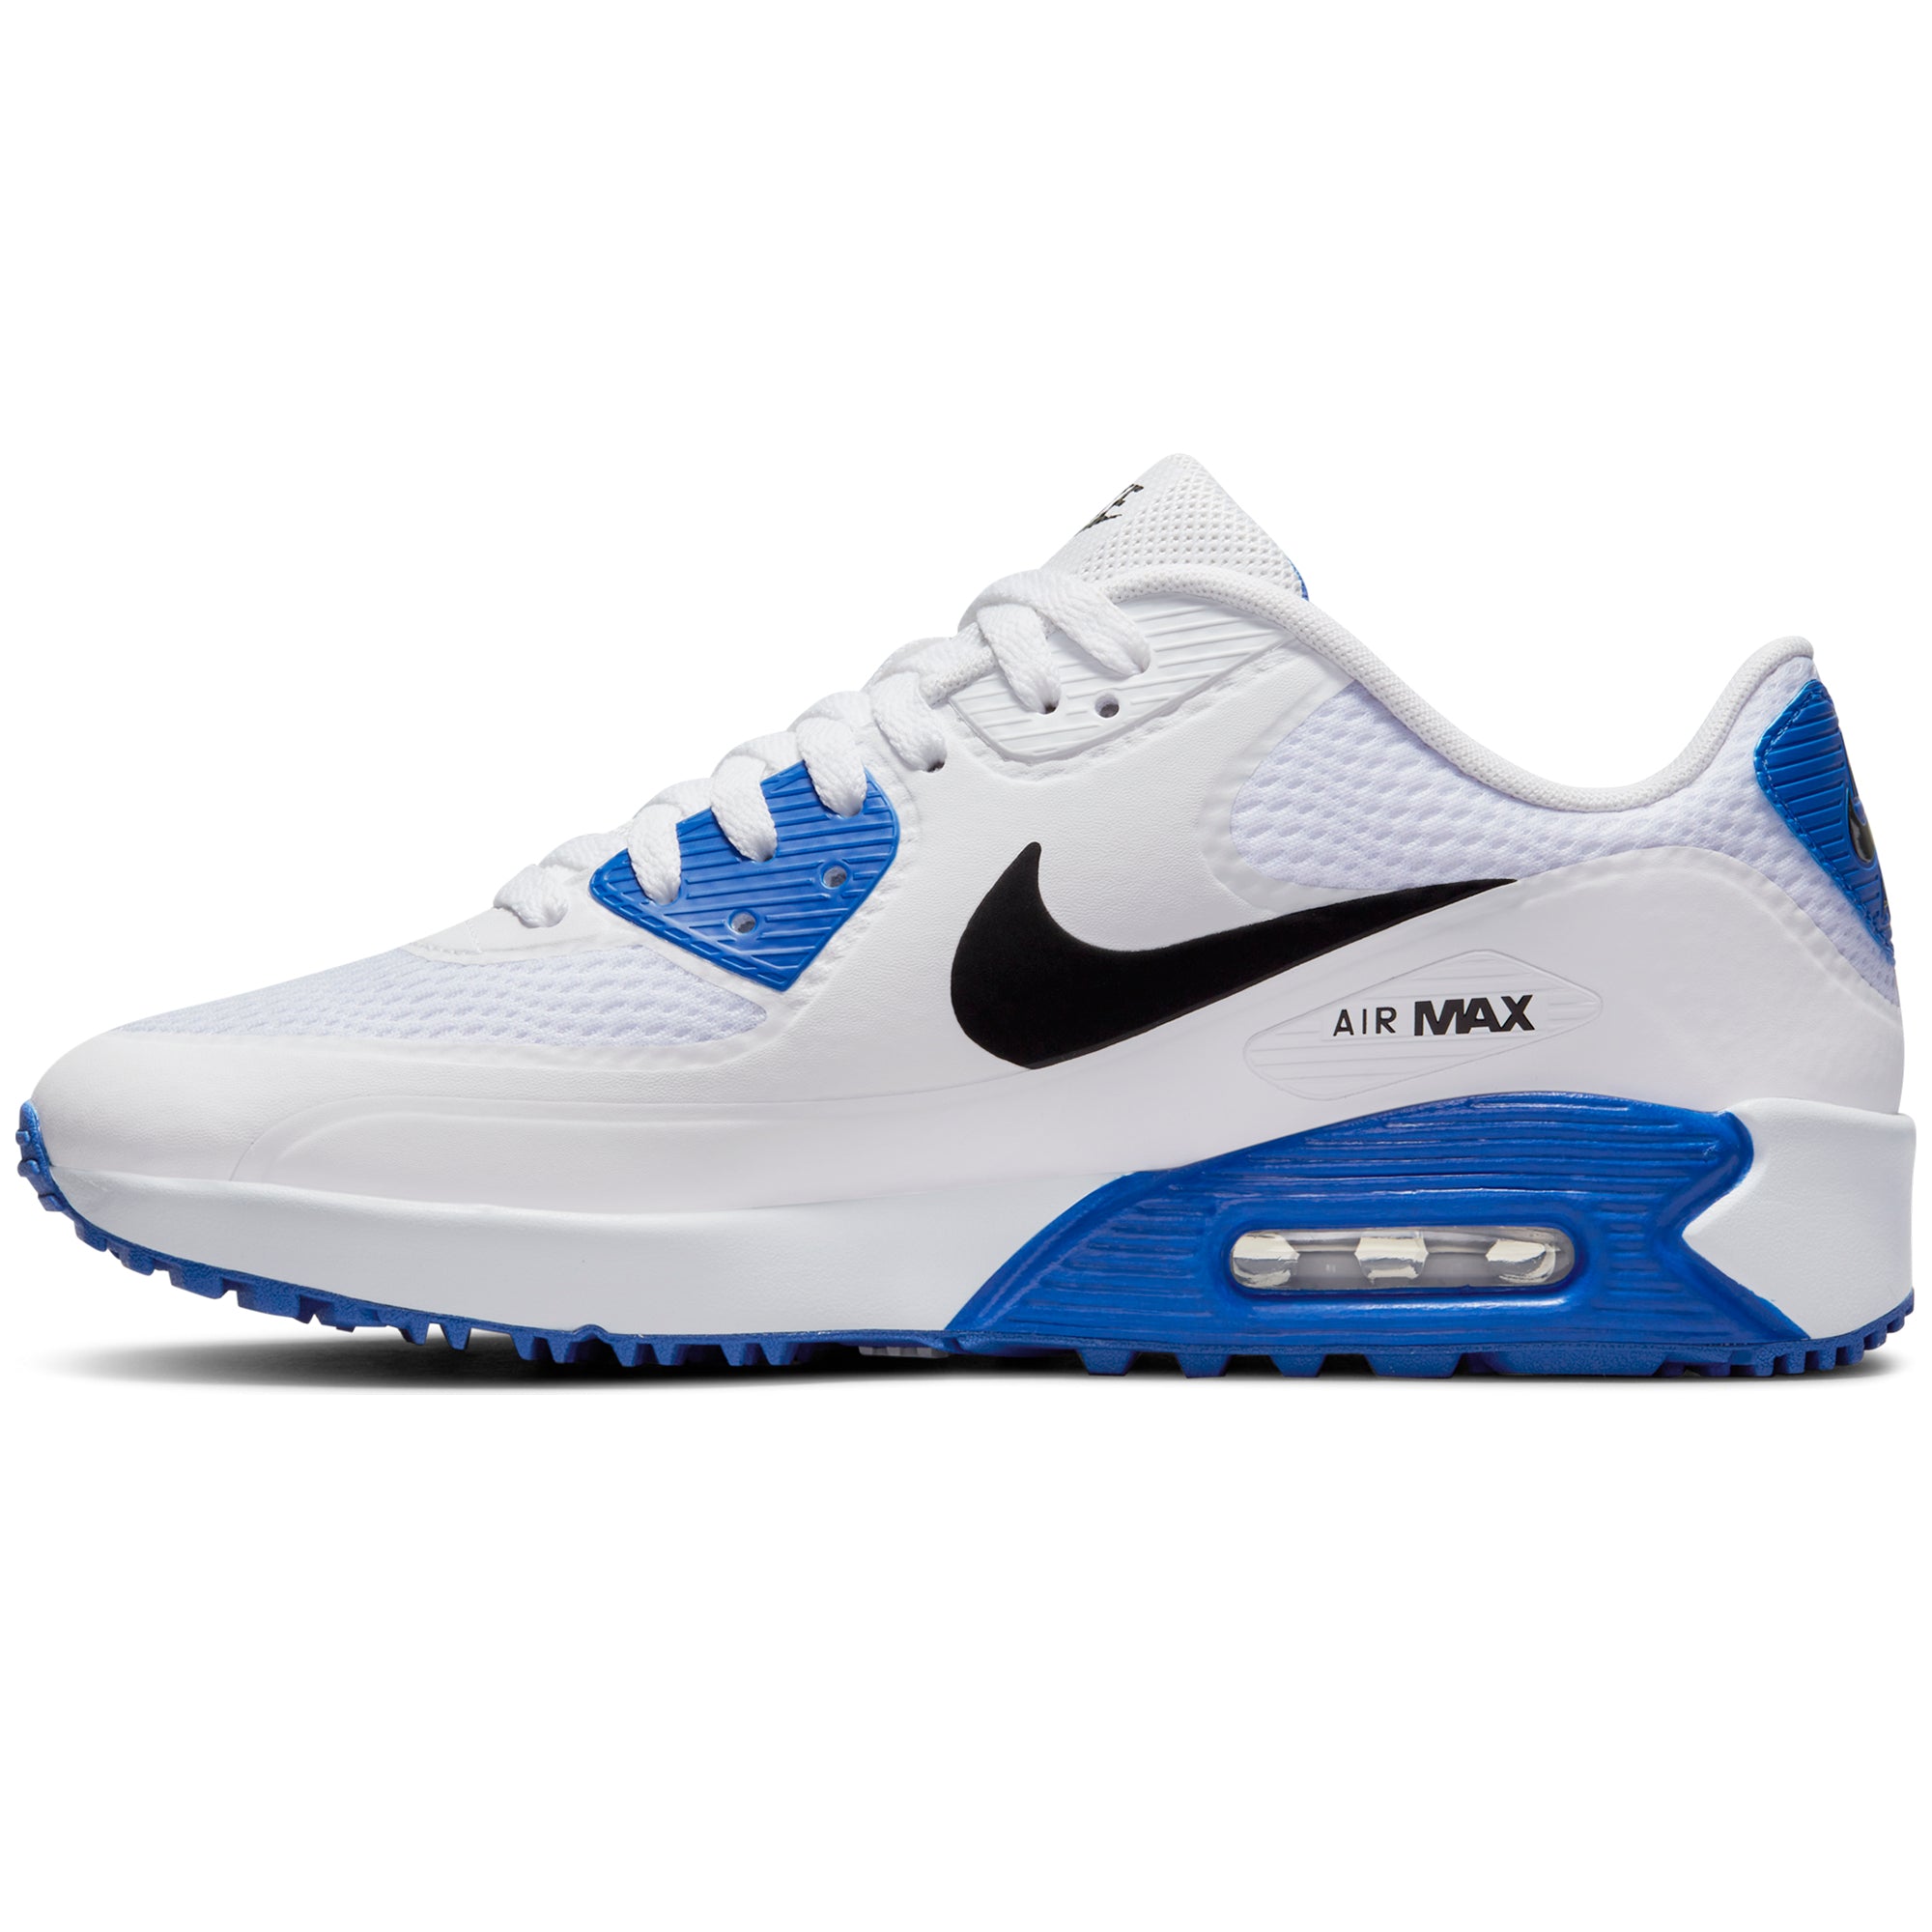 Nike Golf Air Max 90 G Shoes CU9978 White Racer Blue 106 | Function18